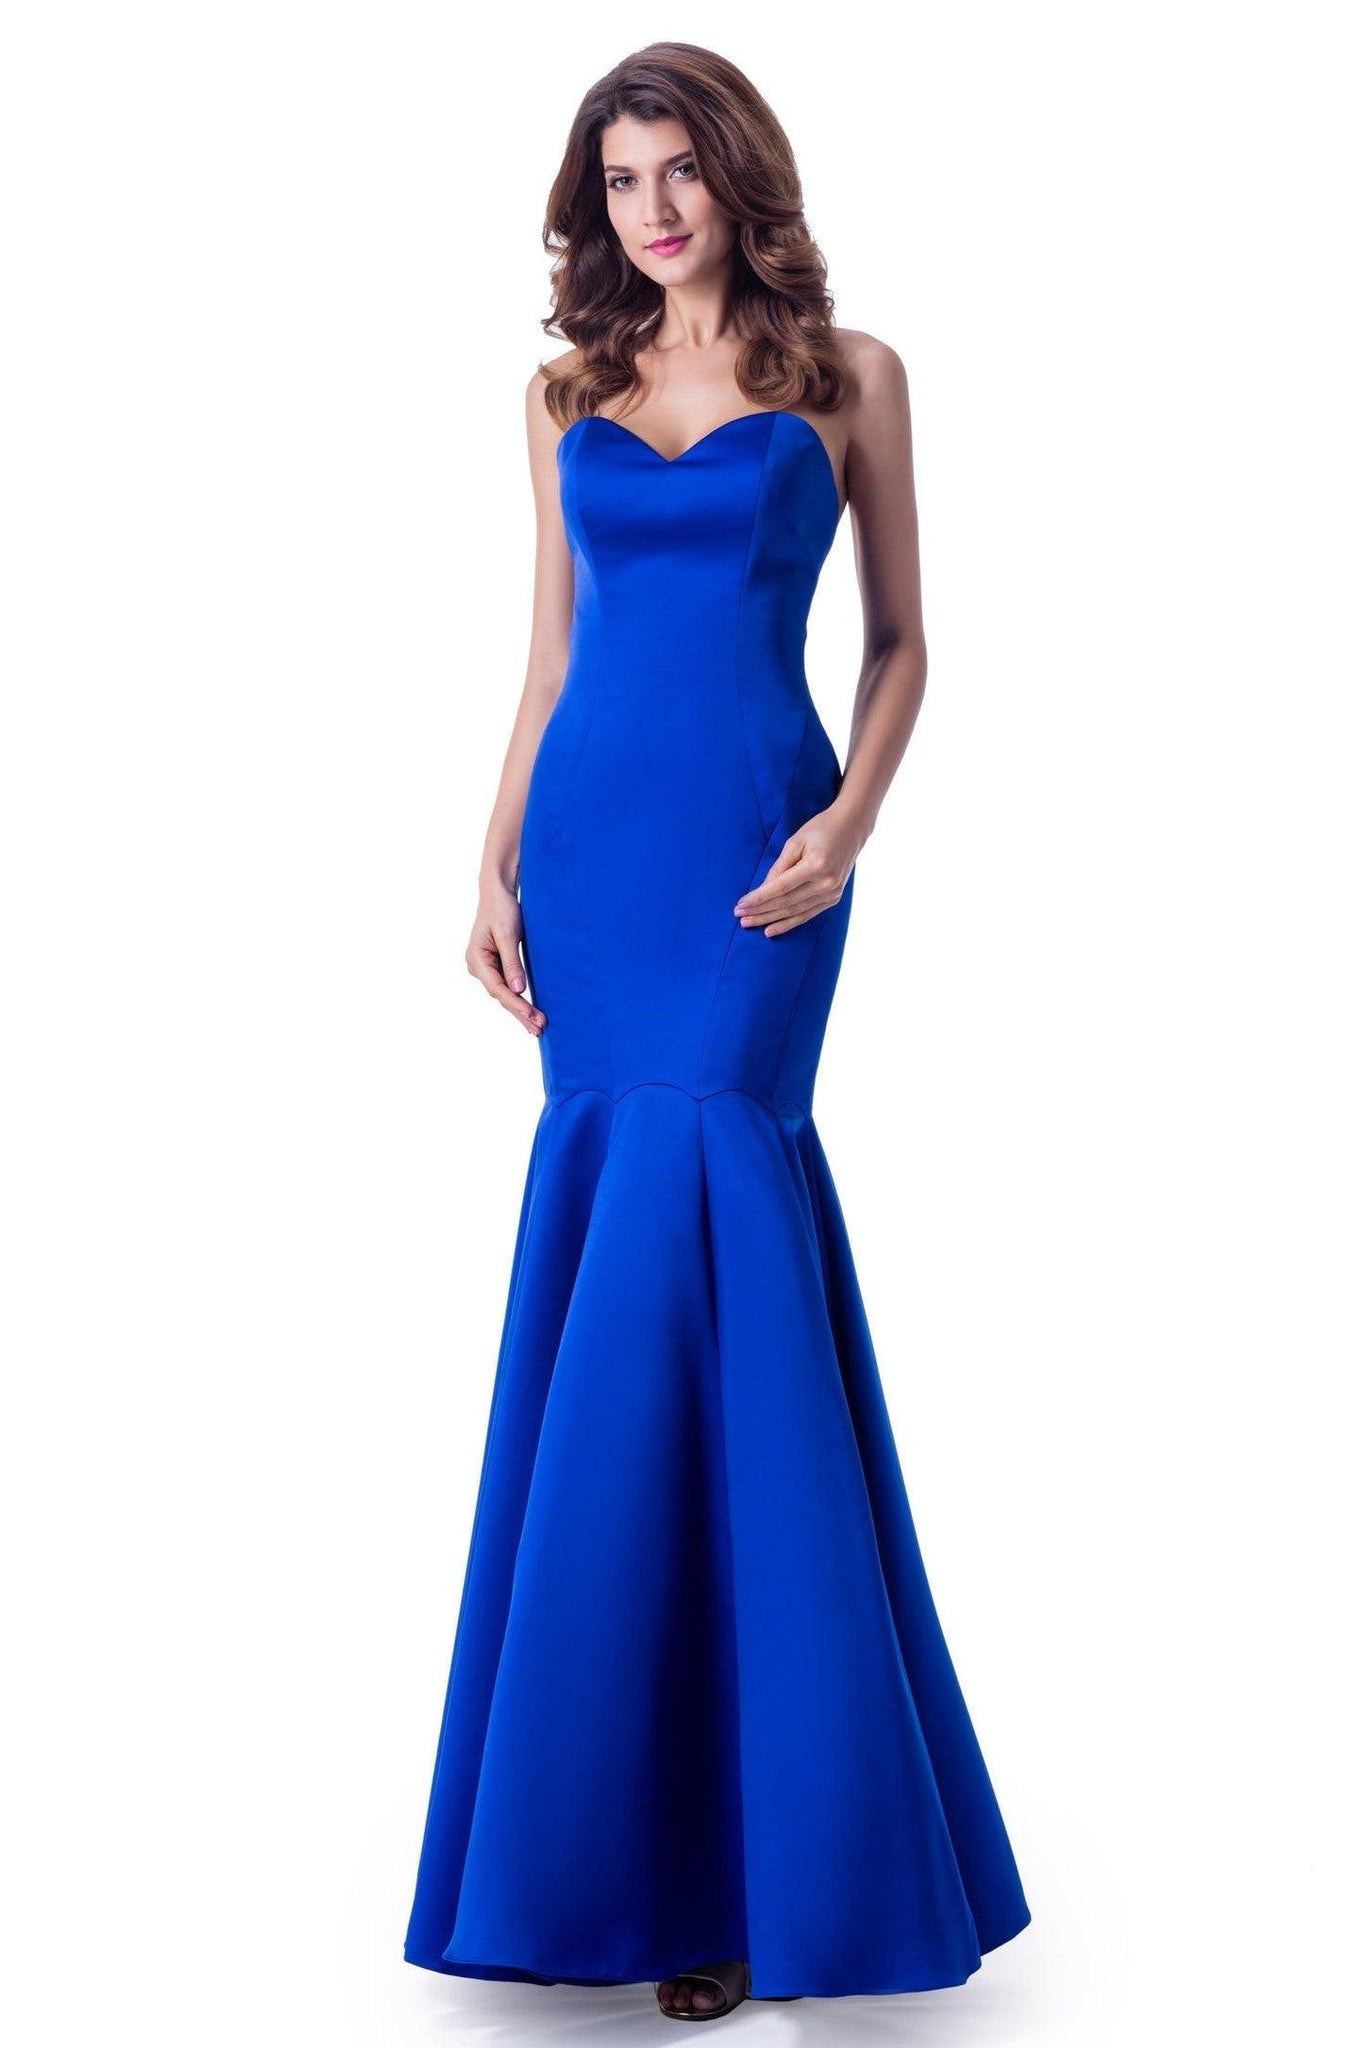 CHARLENE (IN COBALT) 40% OFF WAS £225 NOW - Adore Bridal and Occasion Wear